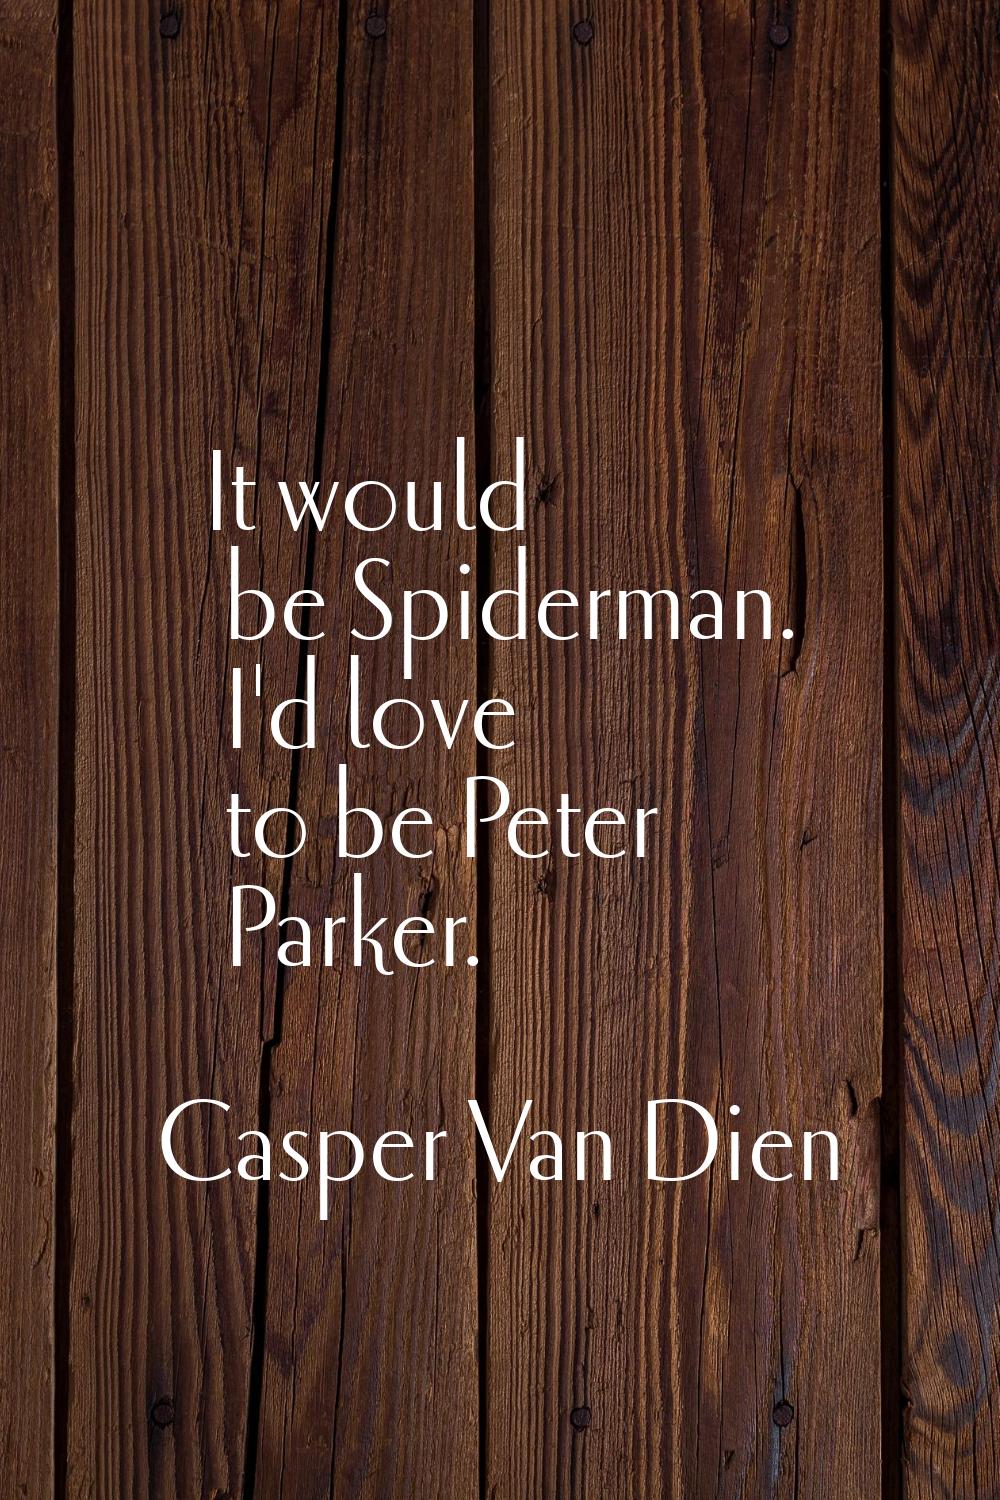 It would be Spiderman. I'd love to be Peter Parker.